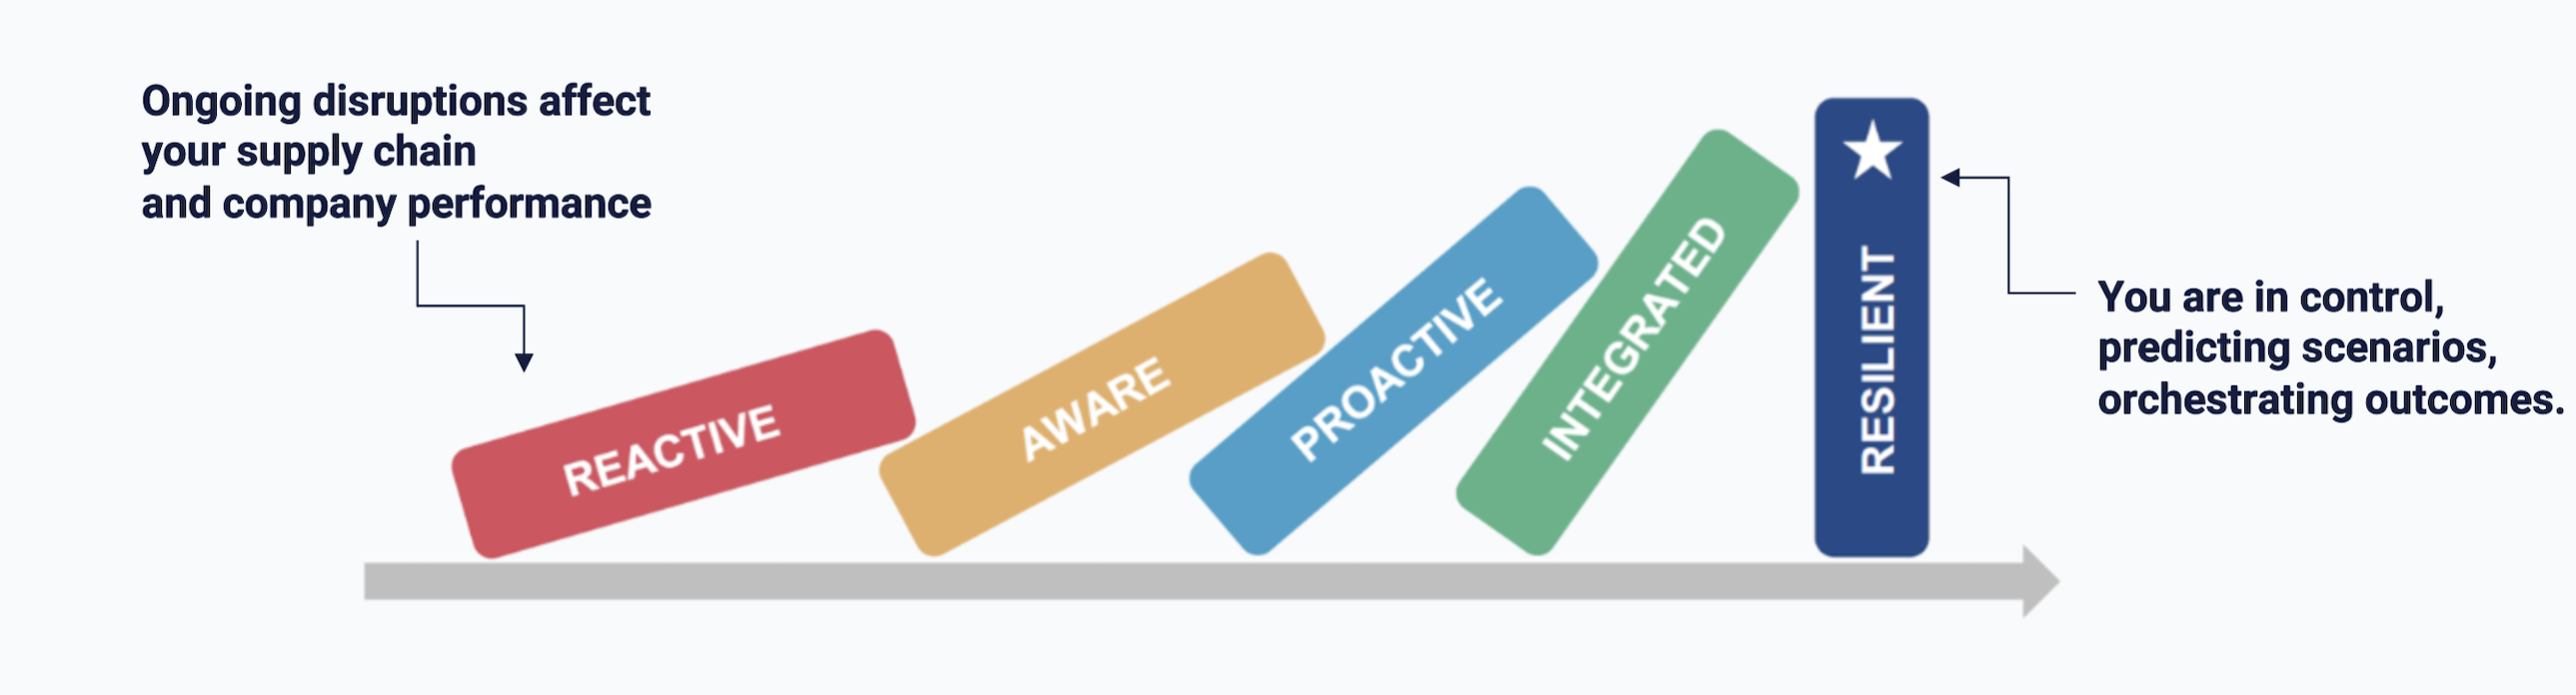 A graphic showing a risk maturity model - moving from reactive, to proactive, to resilient. 